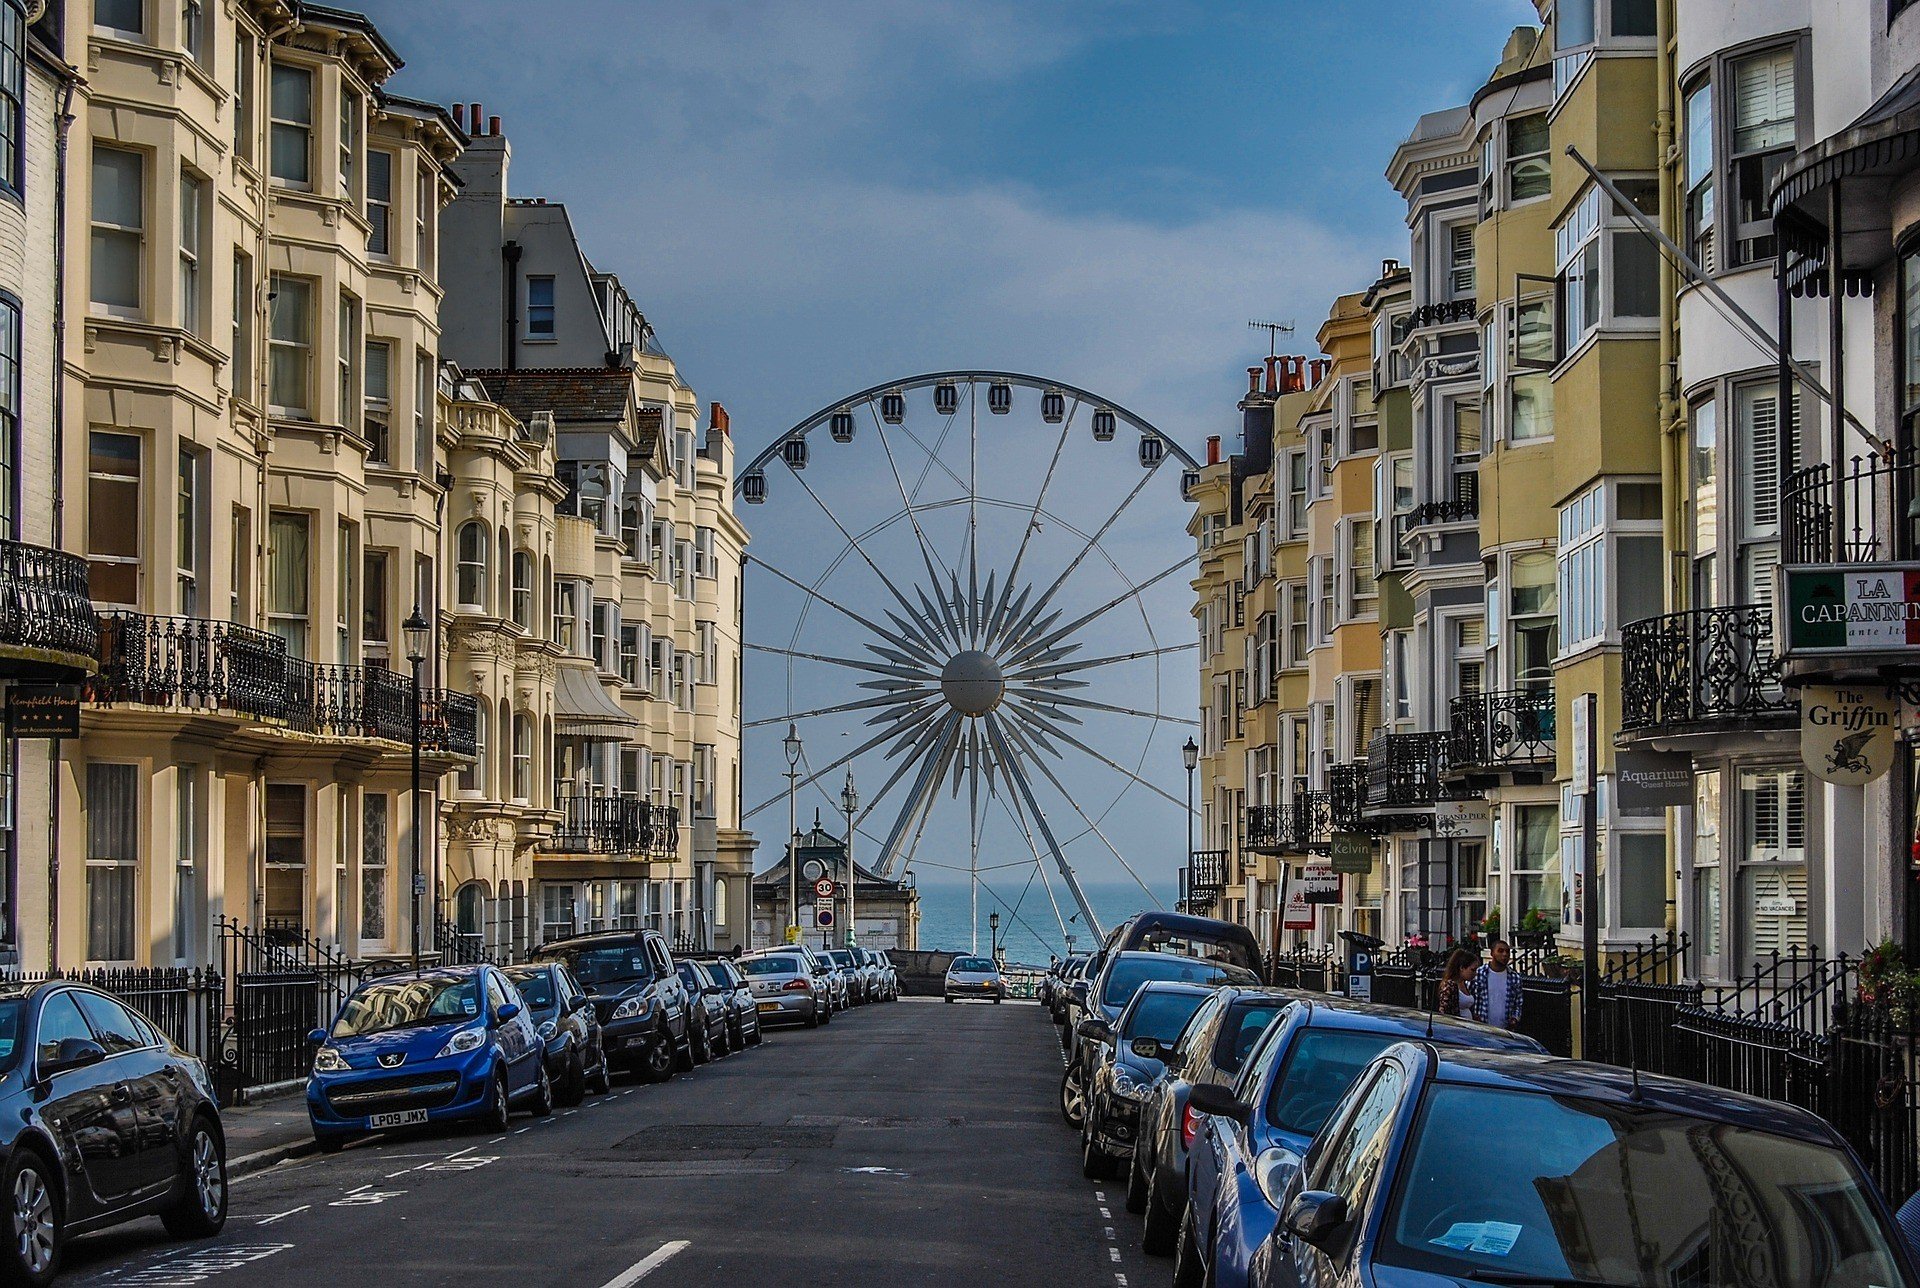 The most COLOURFUL streets in Brighton: best things to do in Brighton!